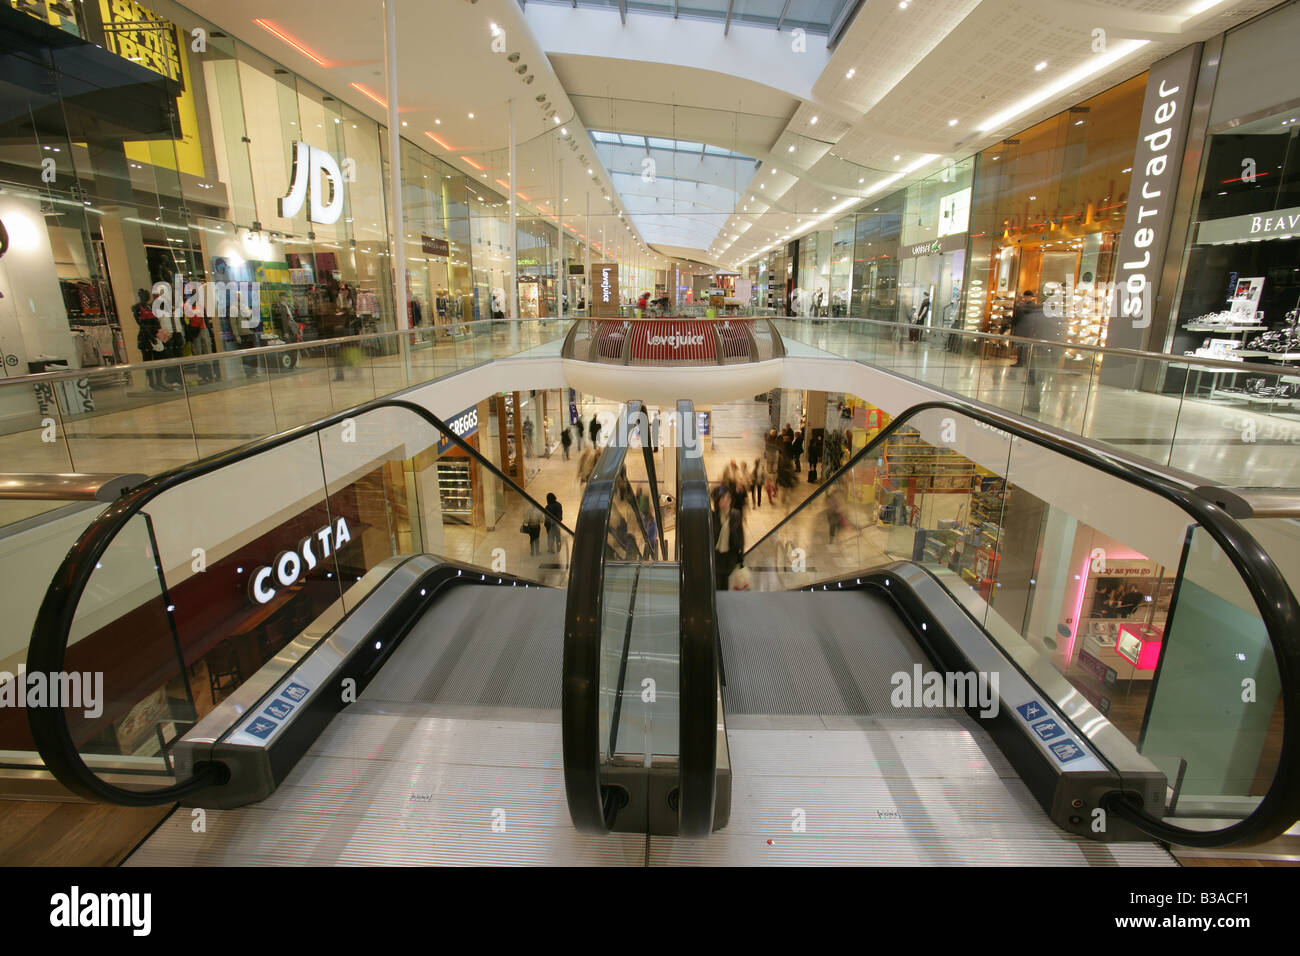 City of Derby, England. Retail shops and stores within the Westfield Derby shopping and leisure centre. Stock Photo